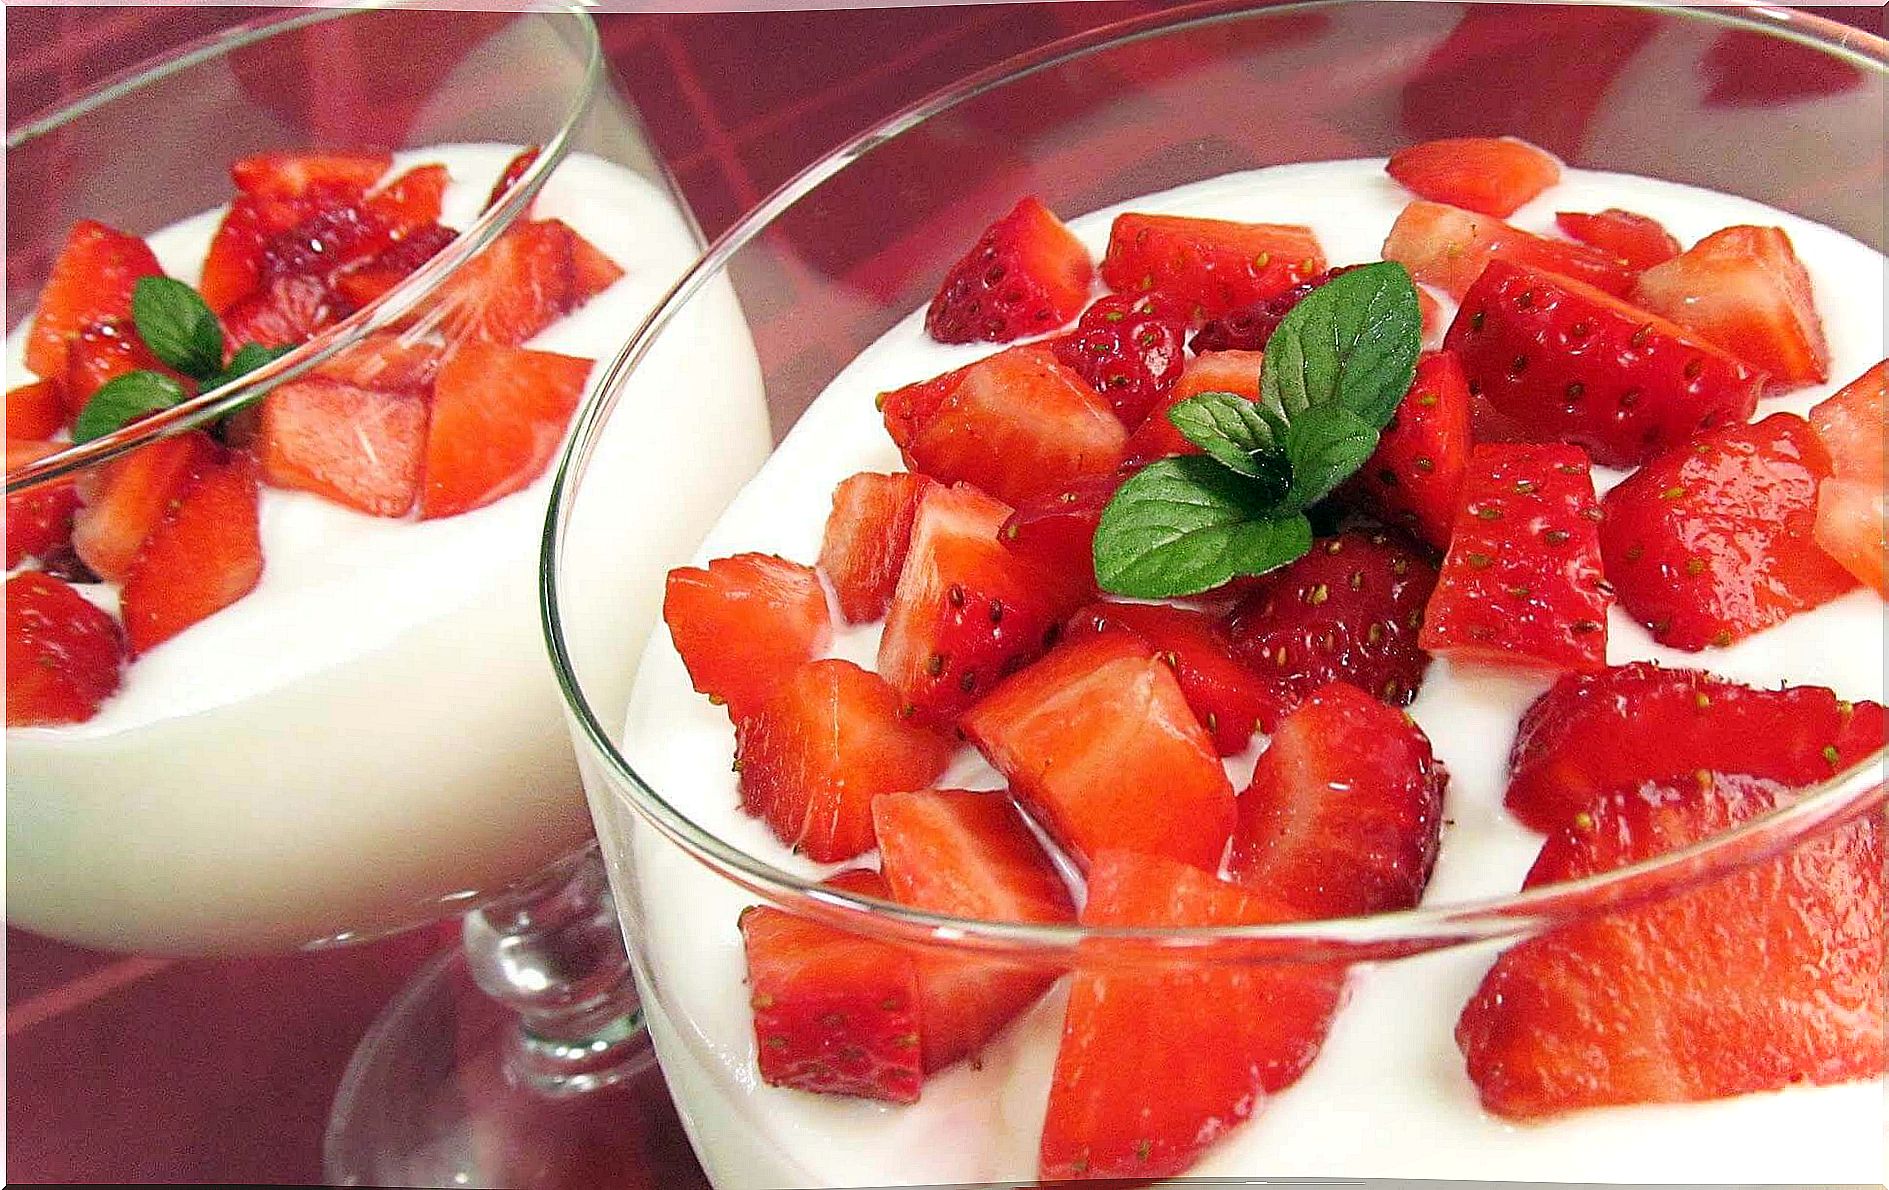 strawberry yogurt is a snack for weight loss